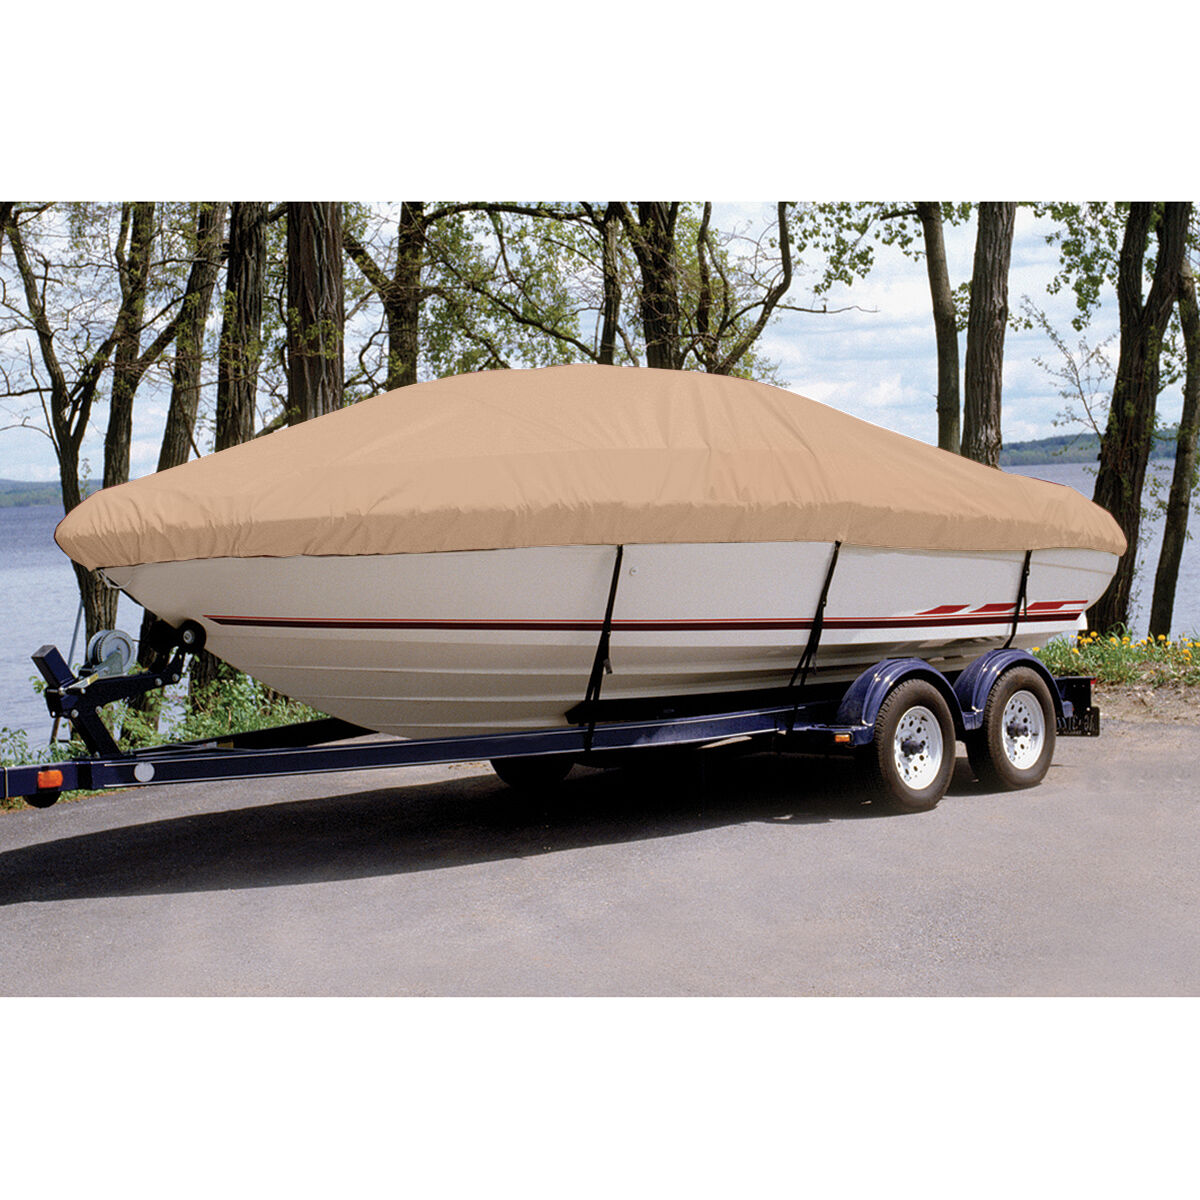 Taylor Made Trailerite Ultima Cover for 98-01 Klamath 14 Delux/SS/SR/ SC w/ Hood Boat Cover in Sand Polyester